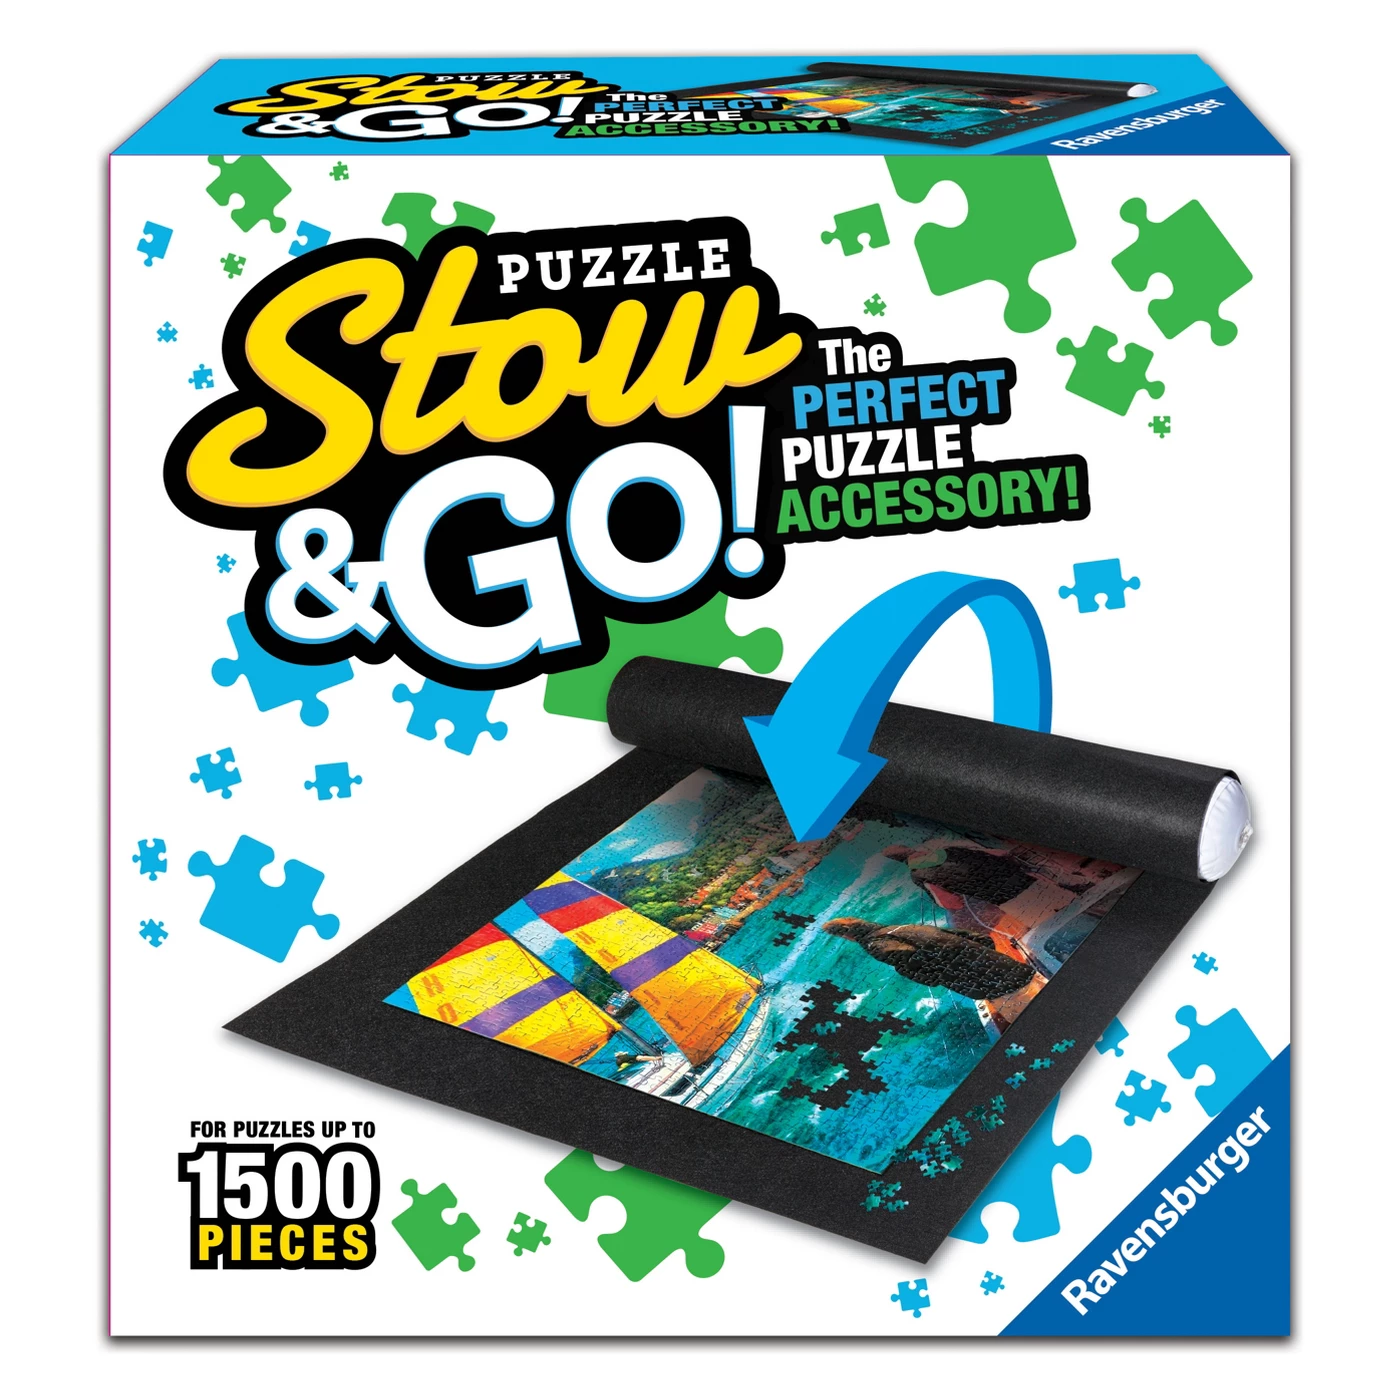 Ravensburger Stow & Go! Puzzle Accessory - image 1 of 3